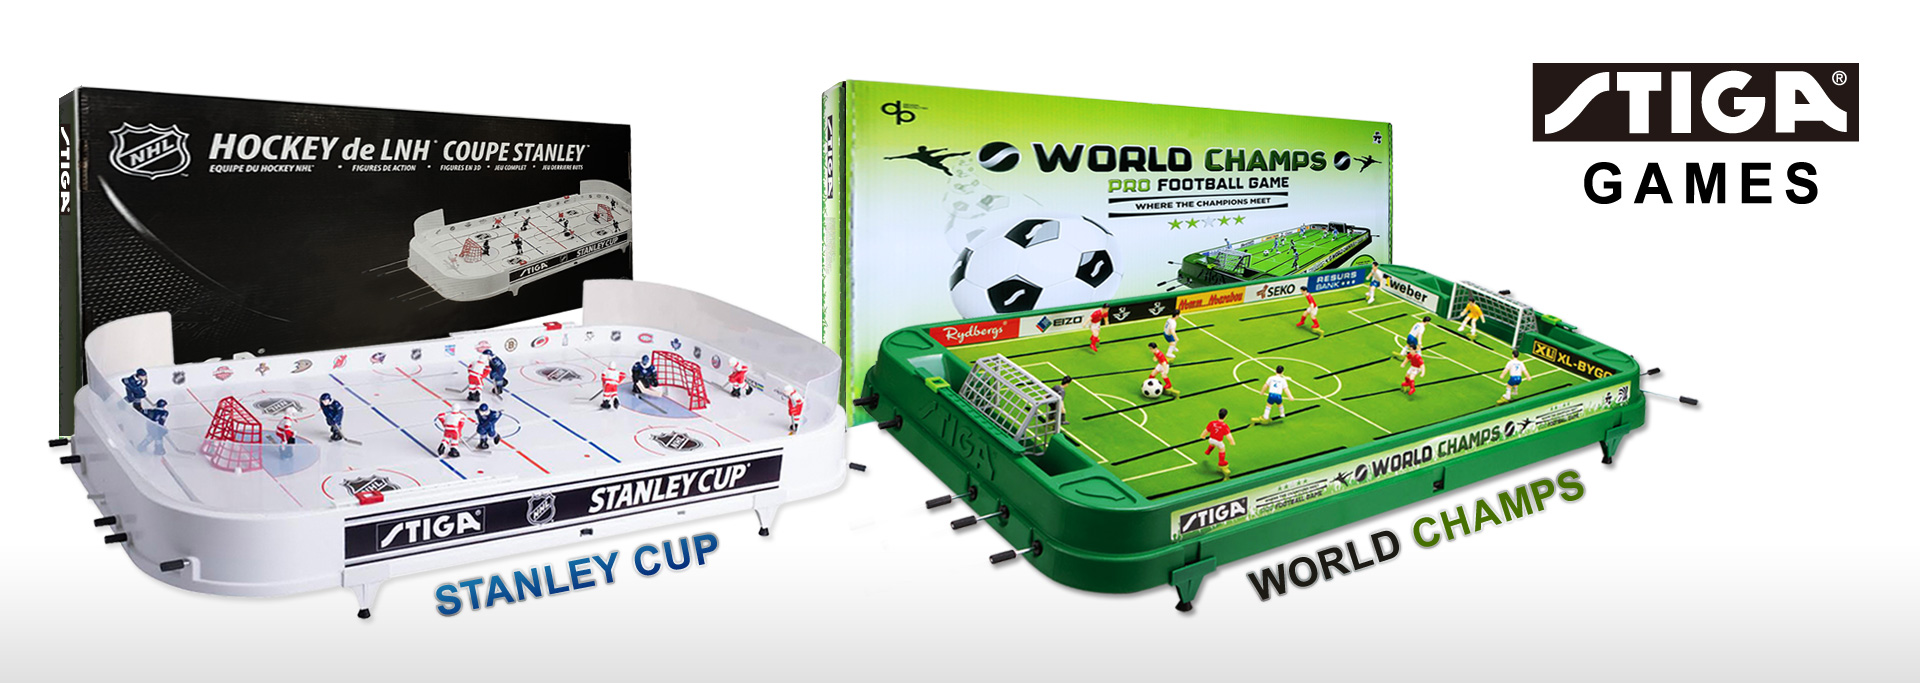 Stiga Table Soccer Game World Champs Table Soccer Game 